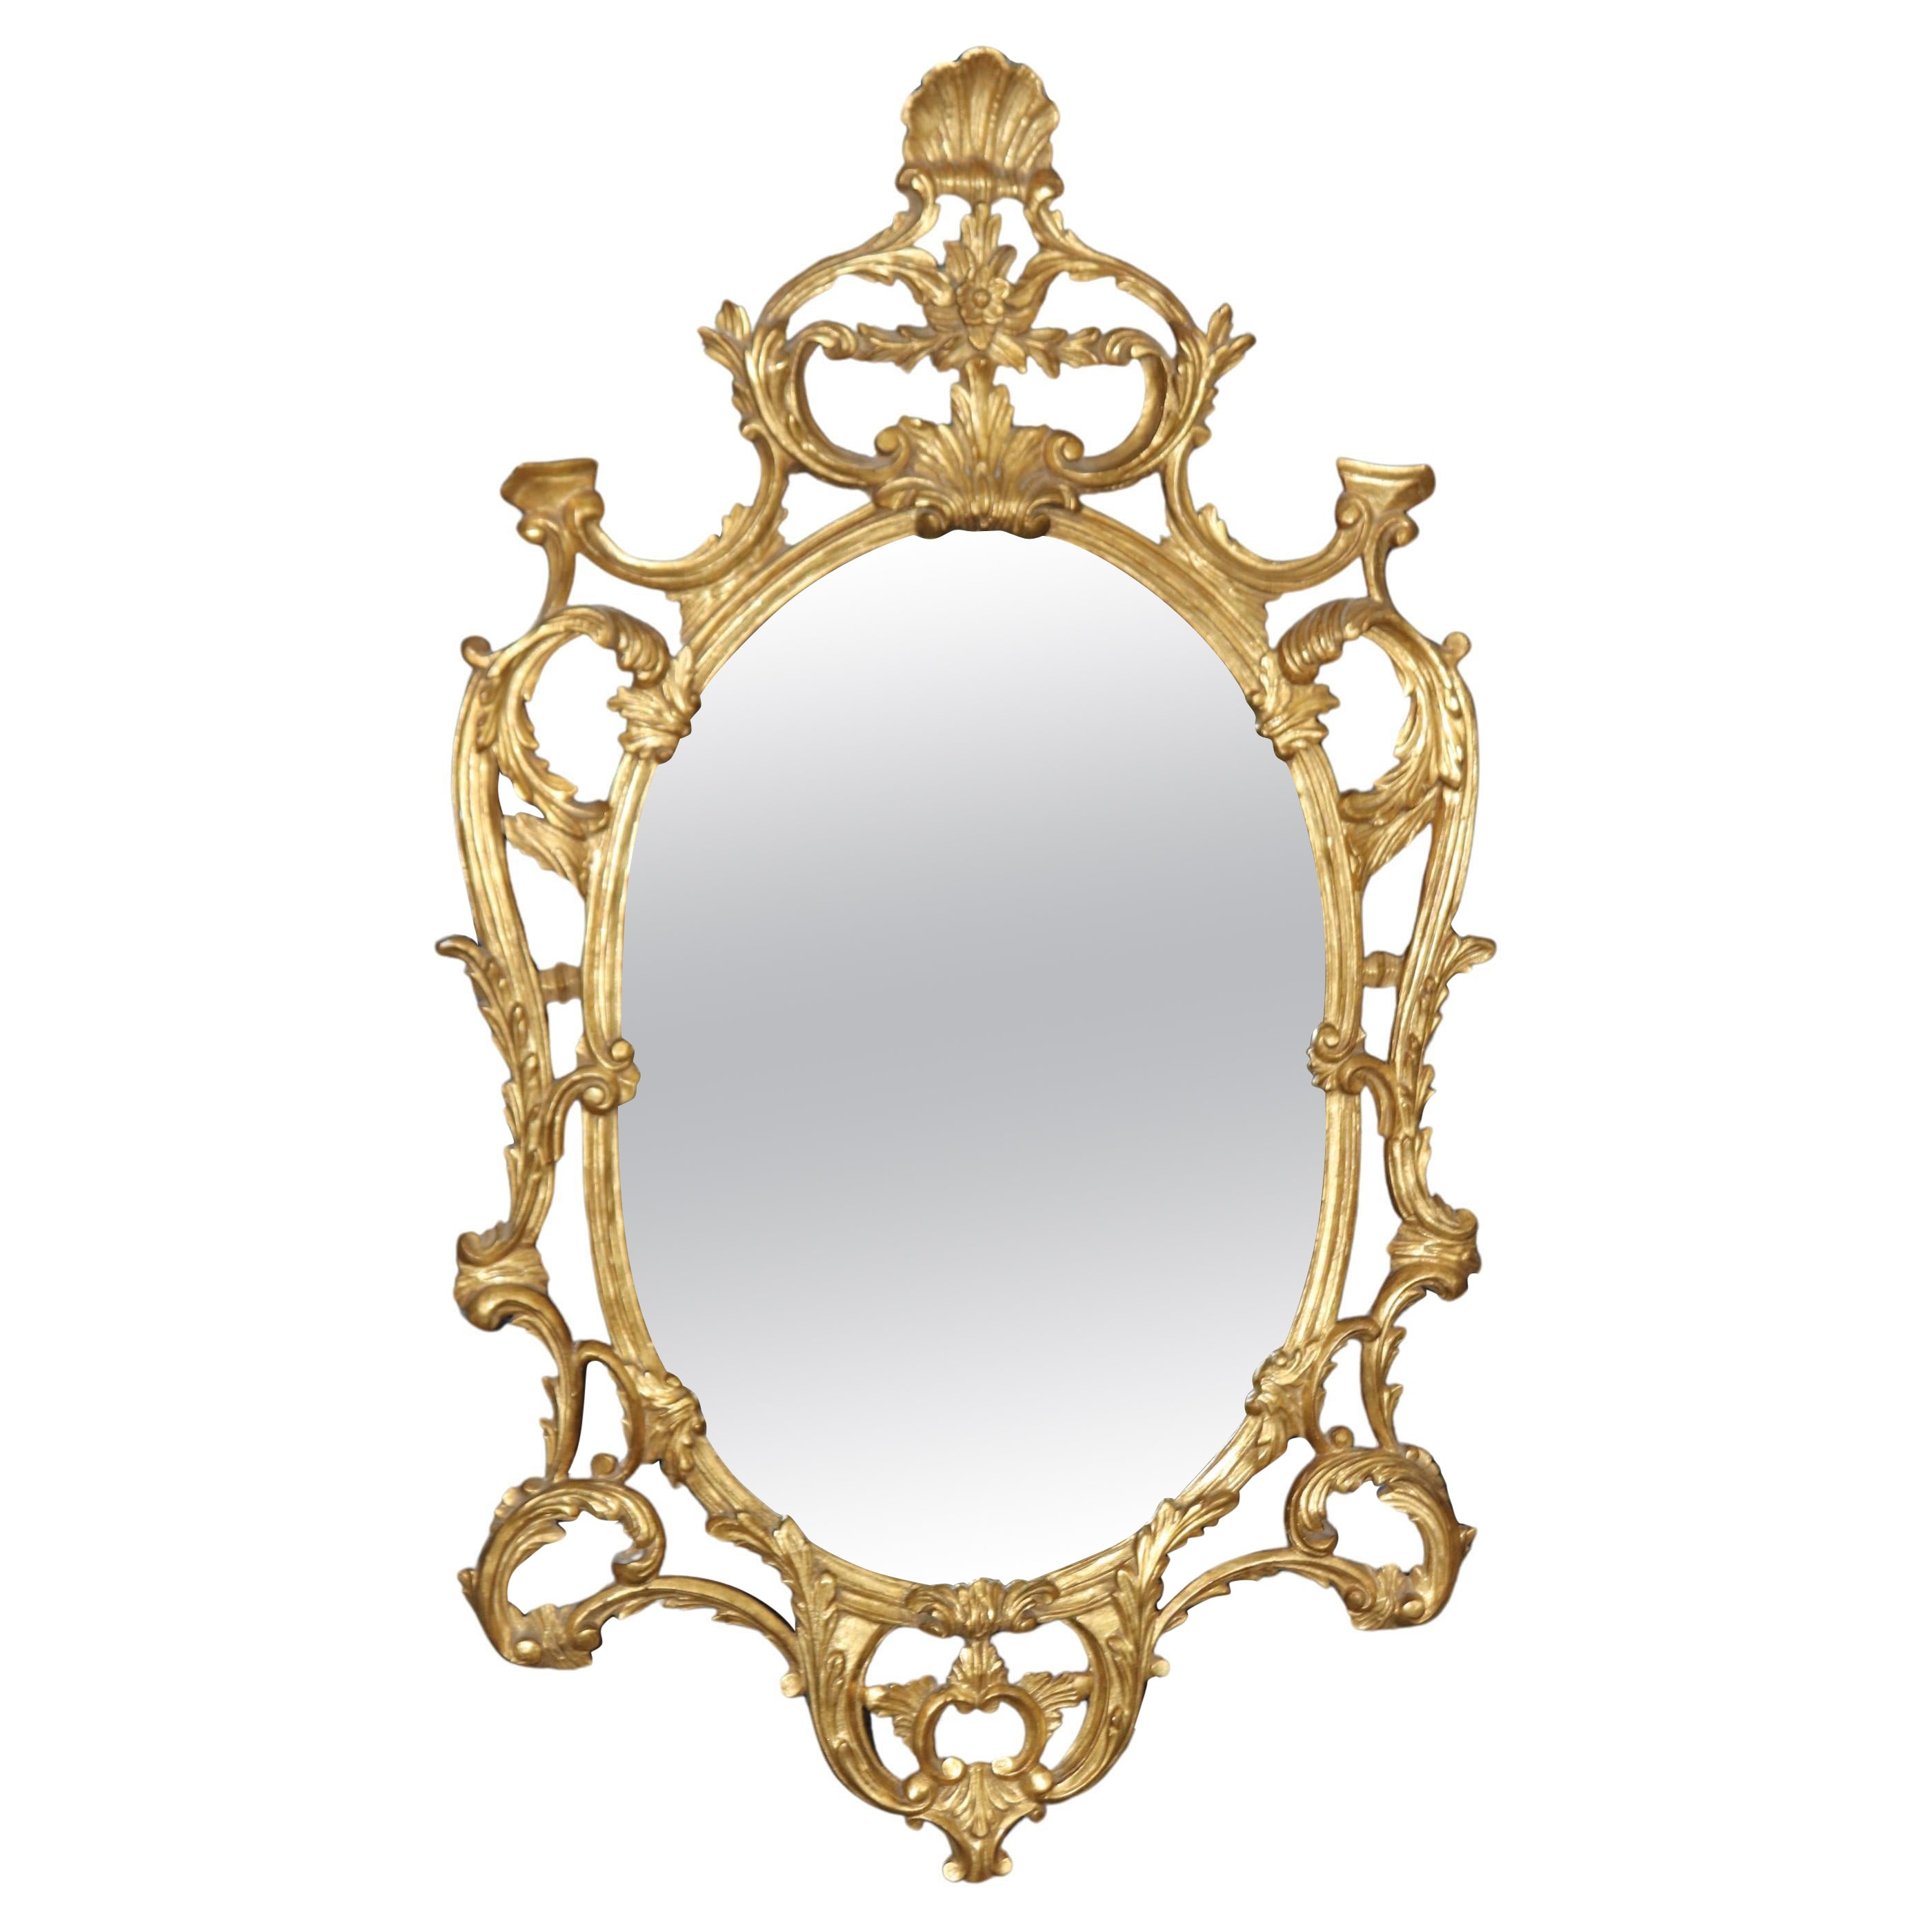 Fine Quality Carved Italian Giltwood Mirror with Shell Motif Atop. 